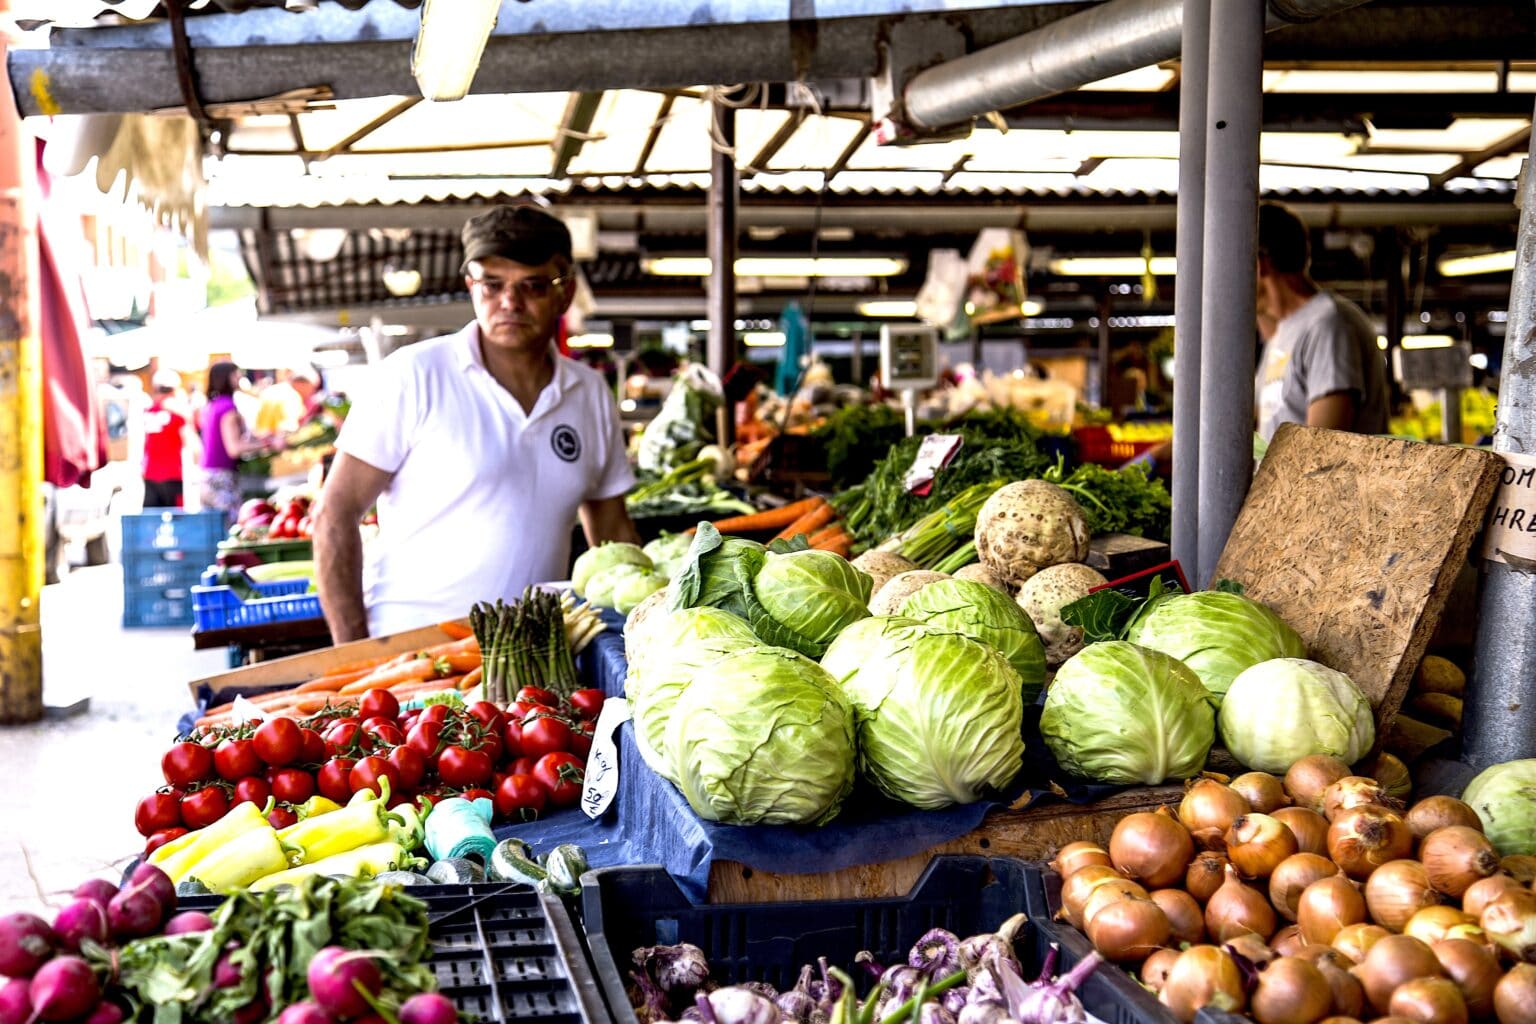 One person in a street market looking at vegetable. Photo: PxHere.